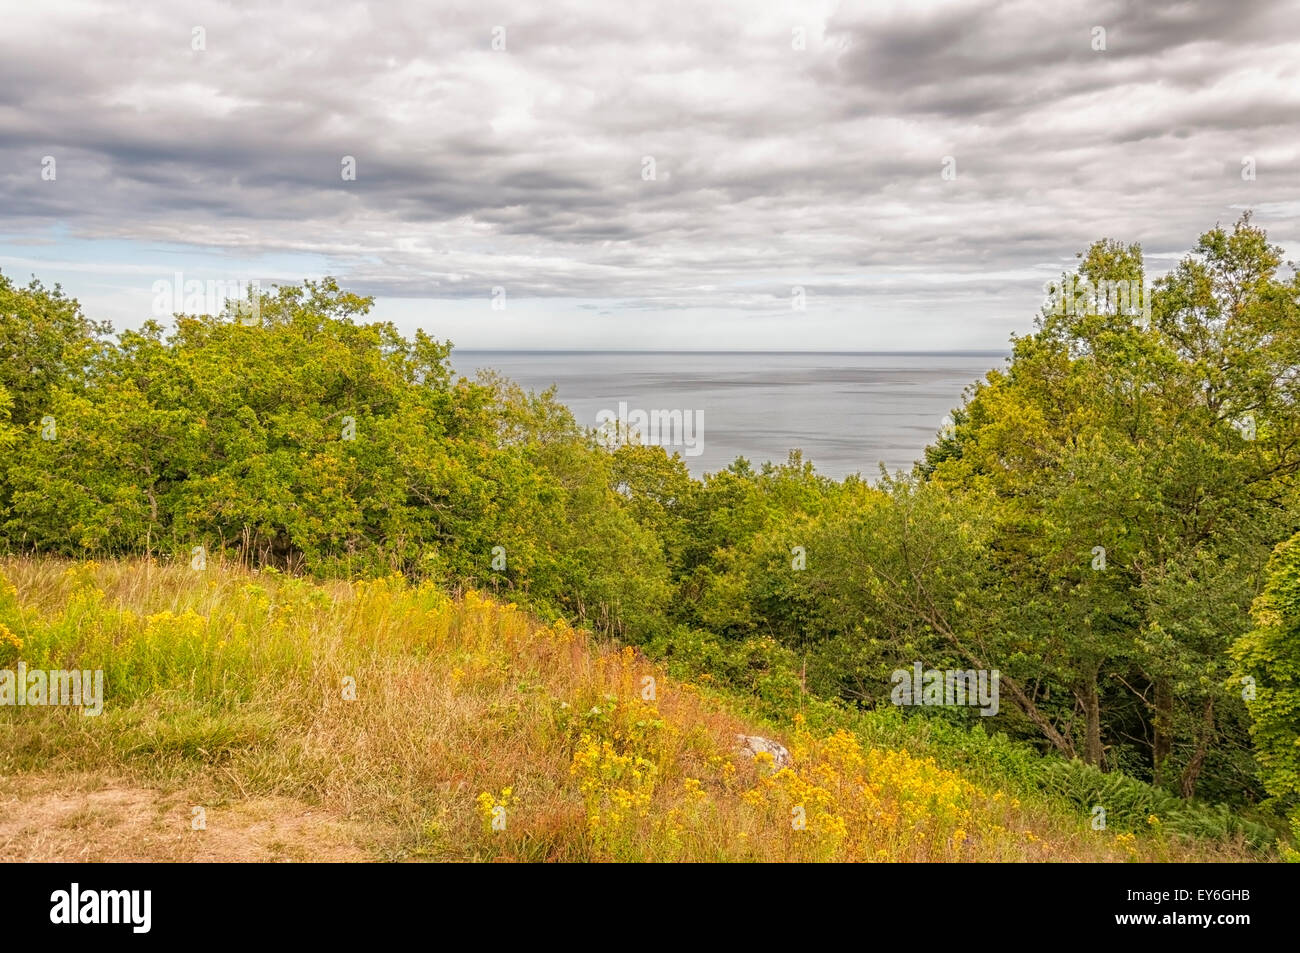 A view of the sea from a ridge in the Stenshuvud national park in Sweden. Stock Photo